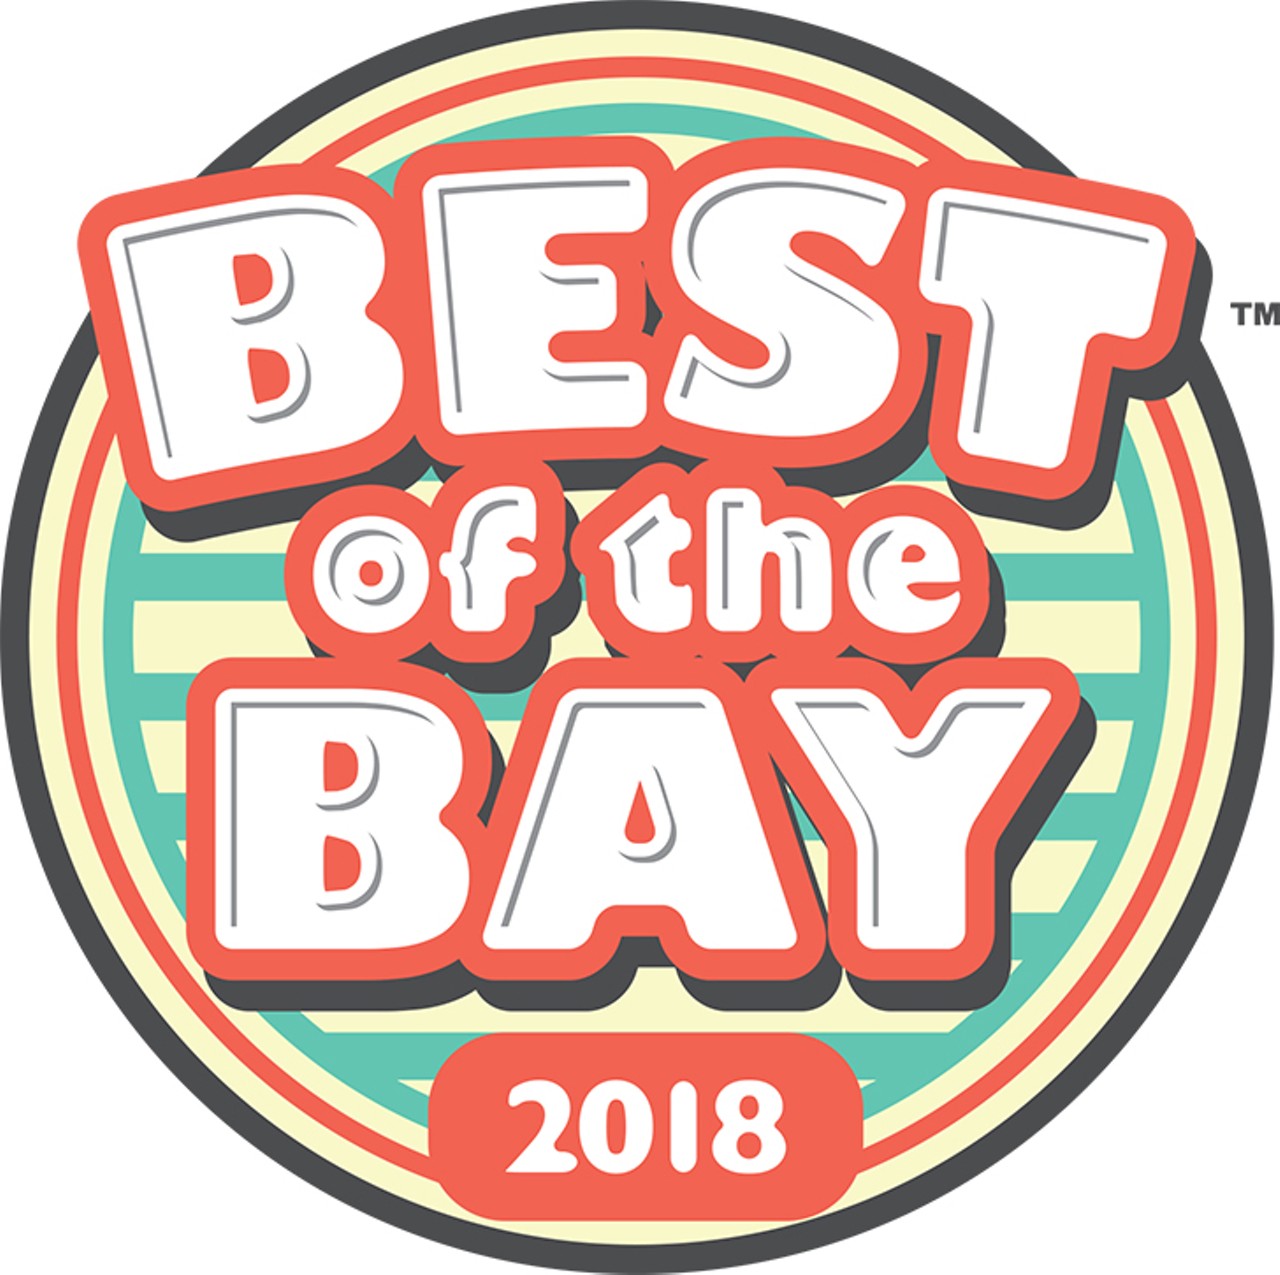 Best of the Bay at the Mahaffey Theater
Wednesday, 6 p.m. 
Photo via Creative Loafing Tampa